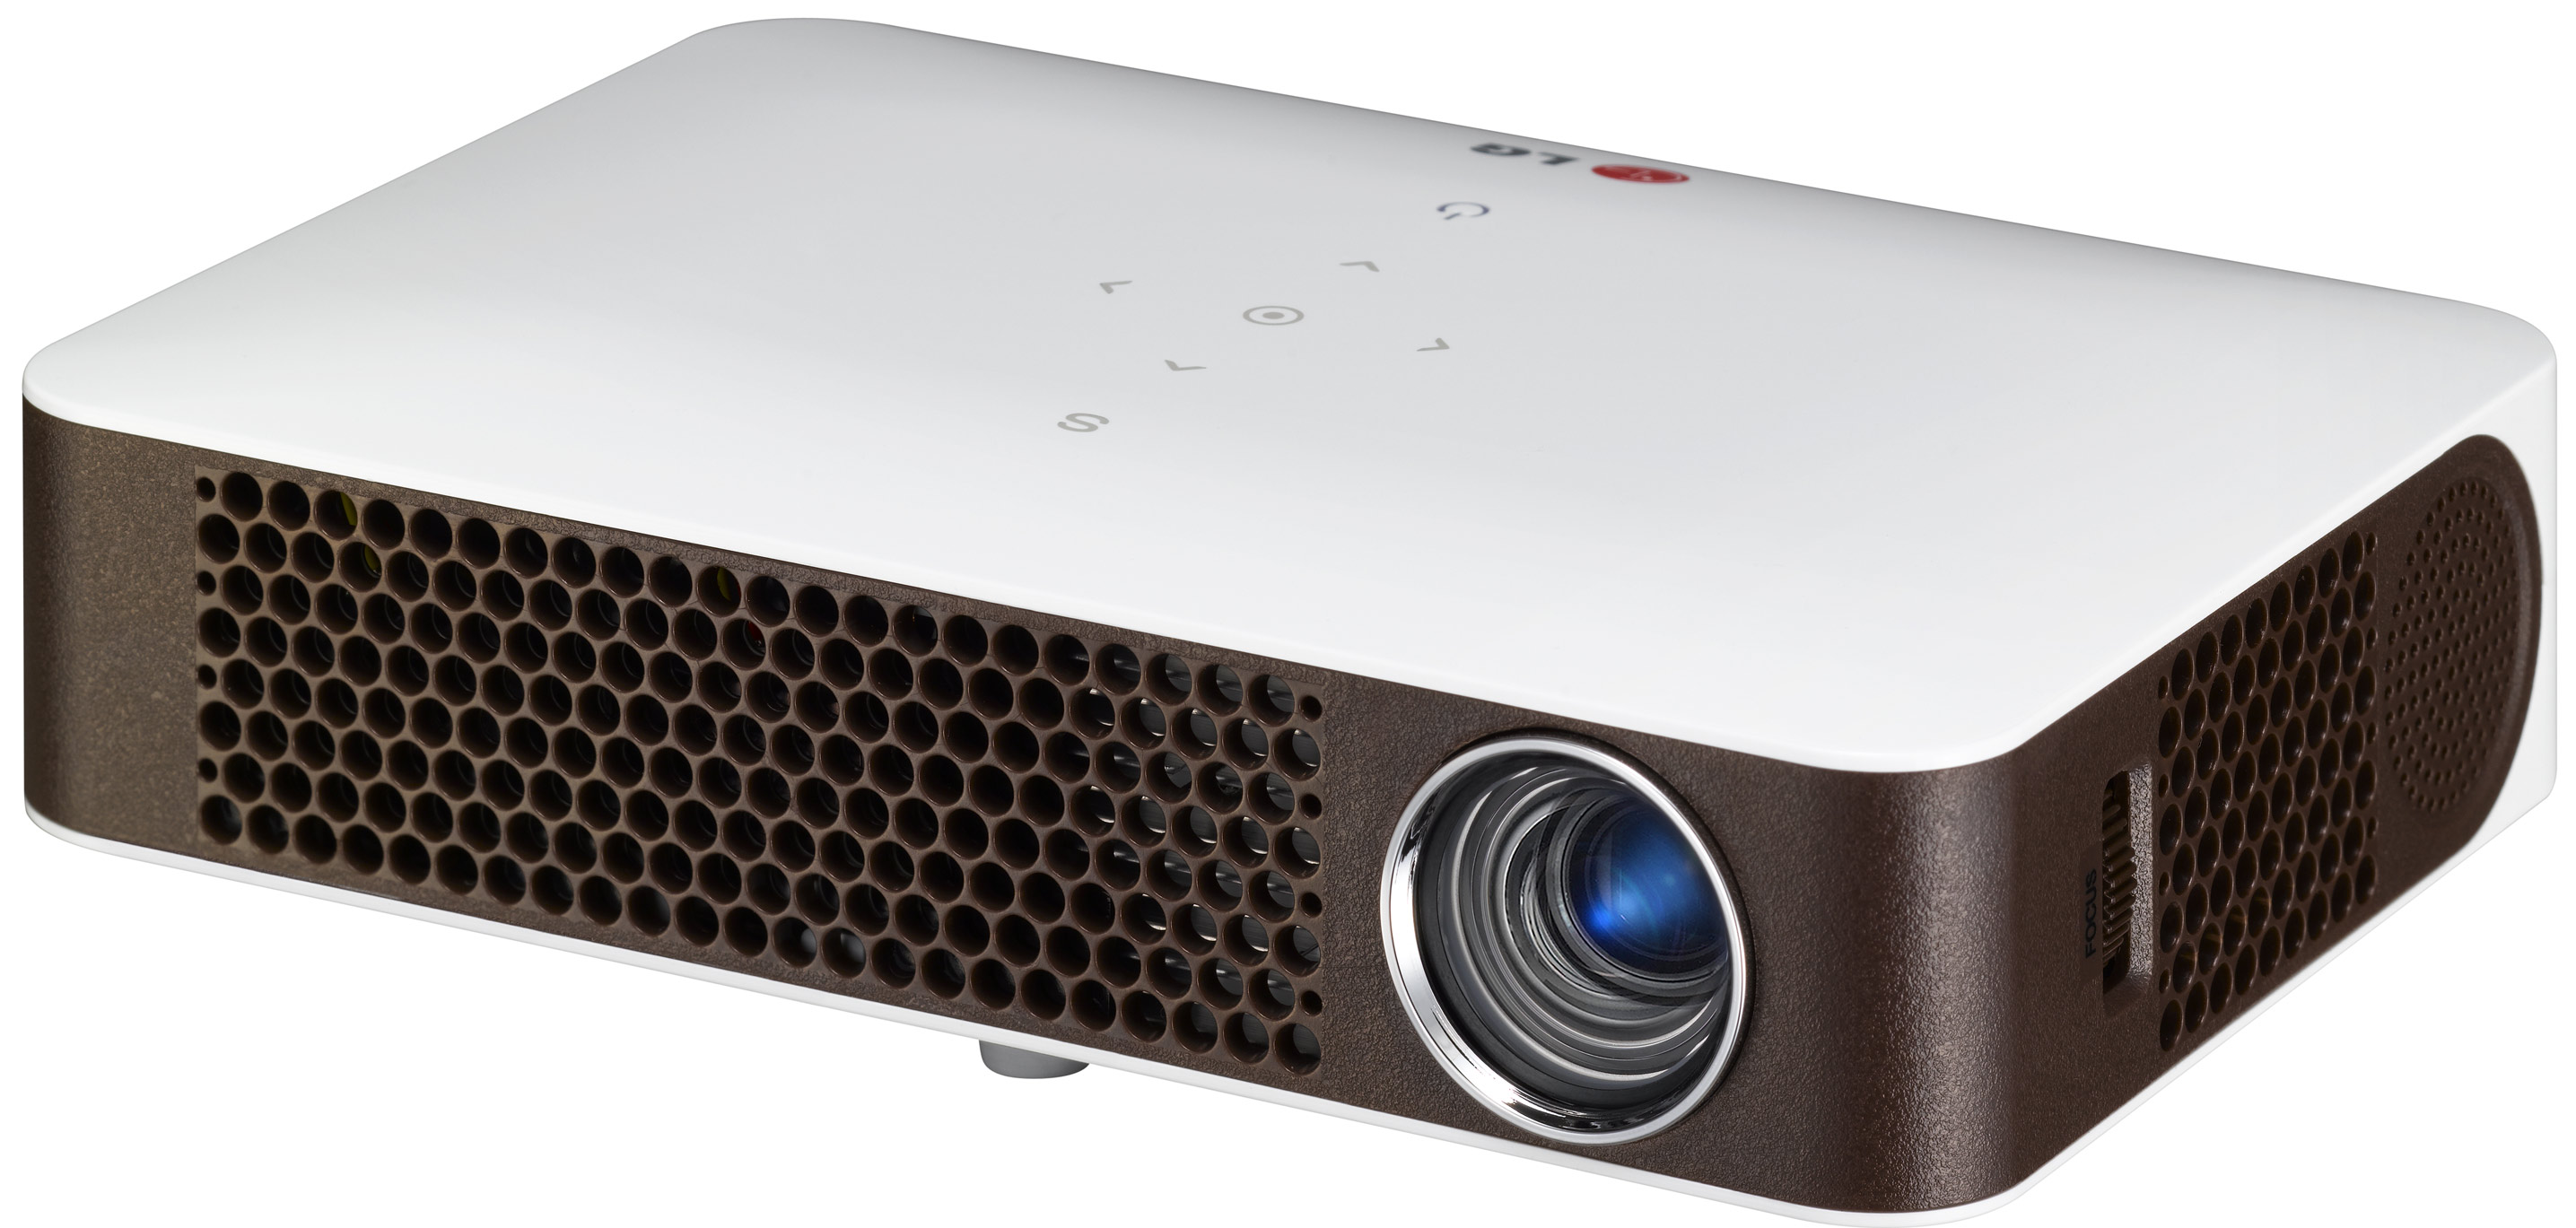 LG PW700 Bluetooth MiniBeam Projector Introduced Benchmark Reviews TechPlayboy